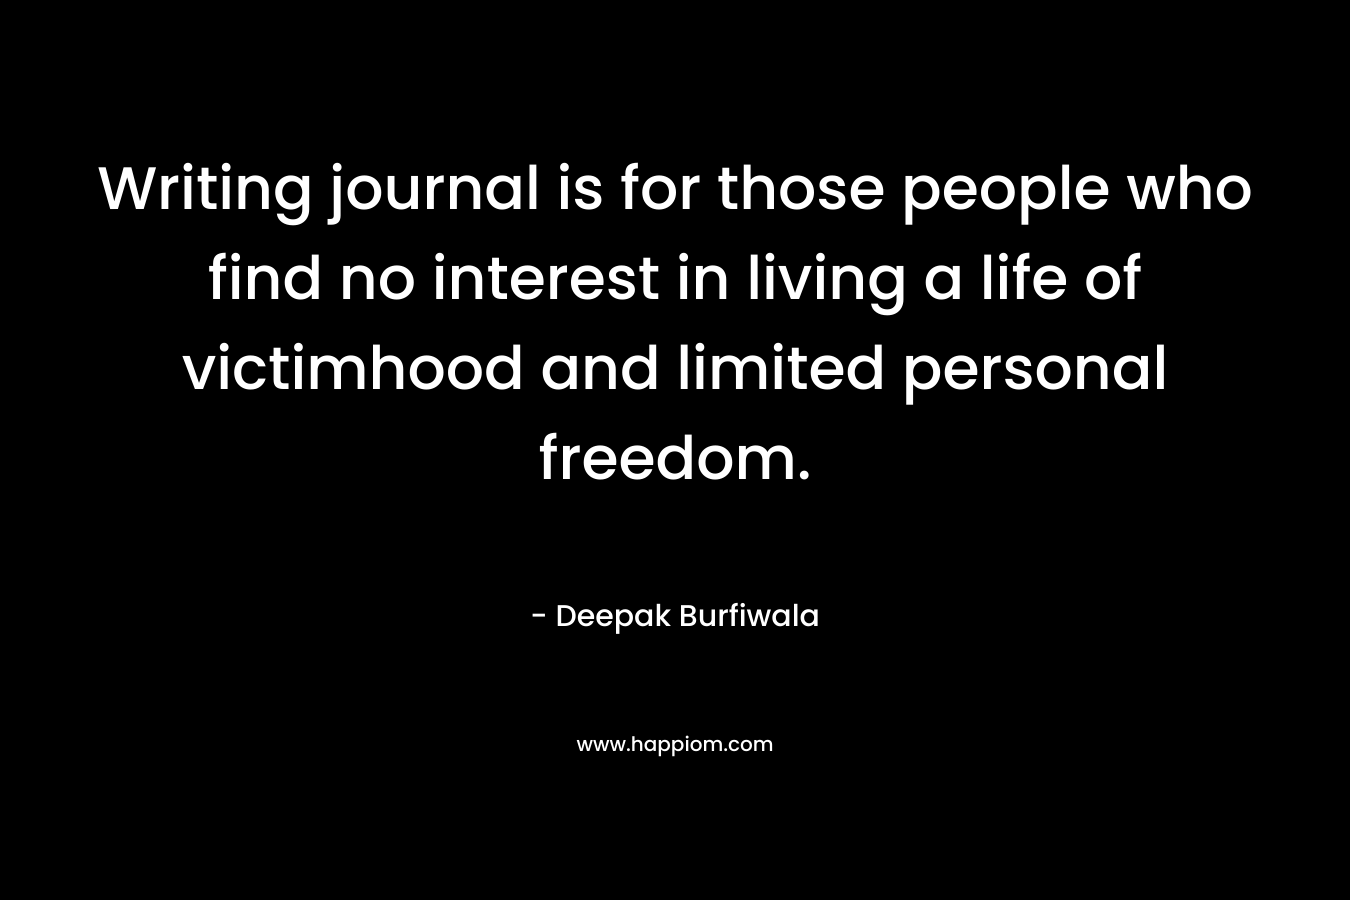 Writing journal is for those people who find no interest in living a life of victimhood and limited personal freedom.